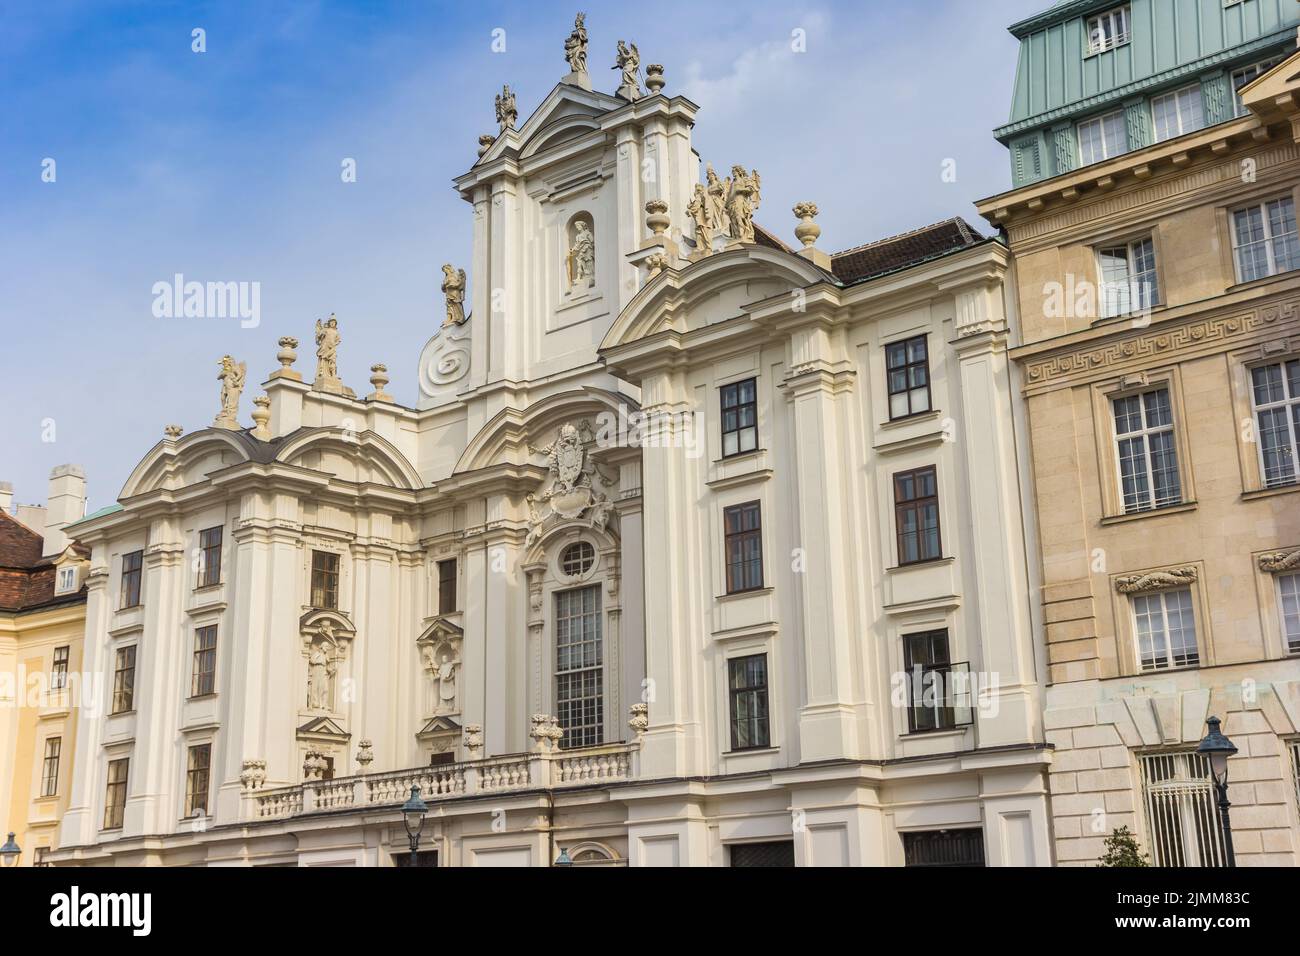 Sculptures on a historic building in Vienna, Austria Stock Photo